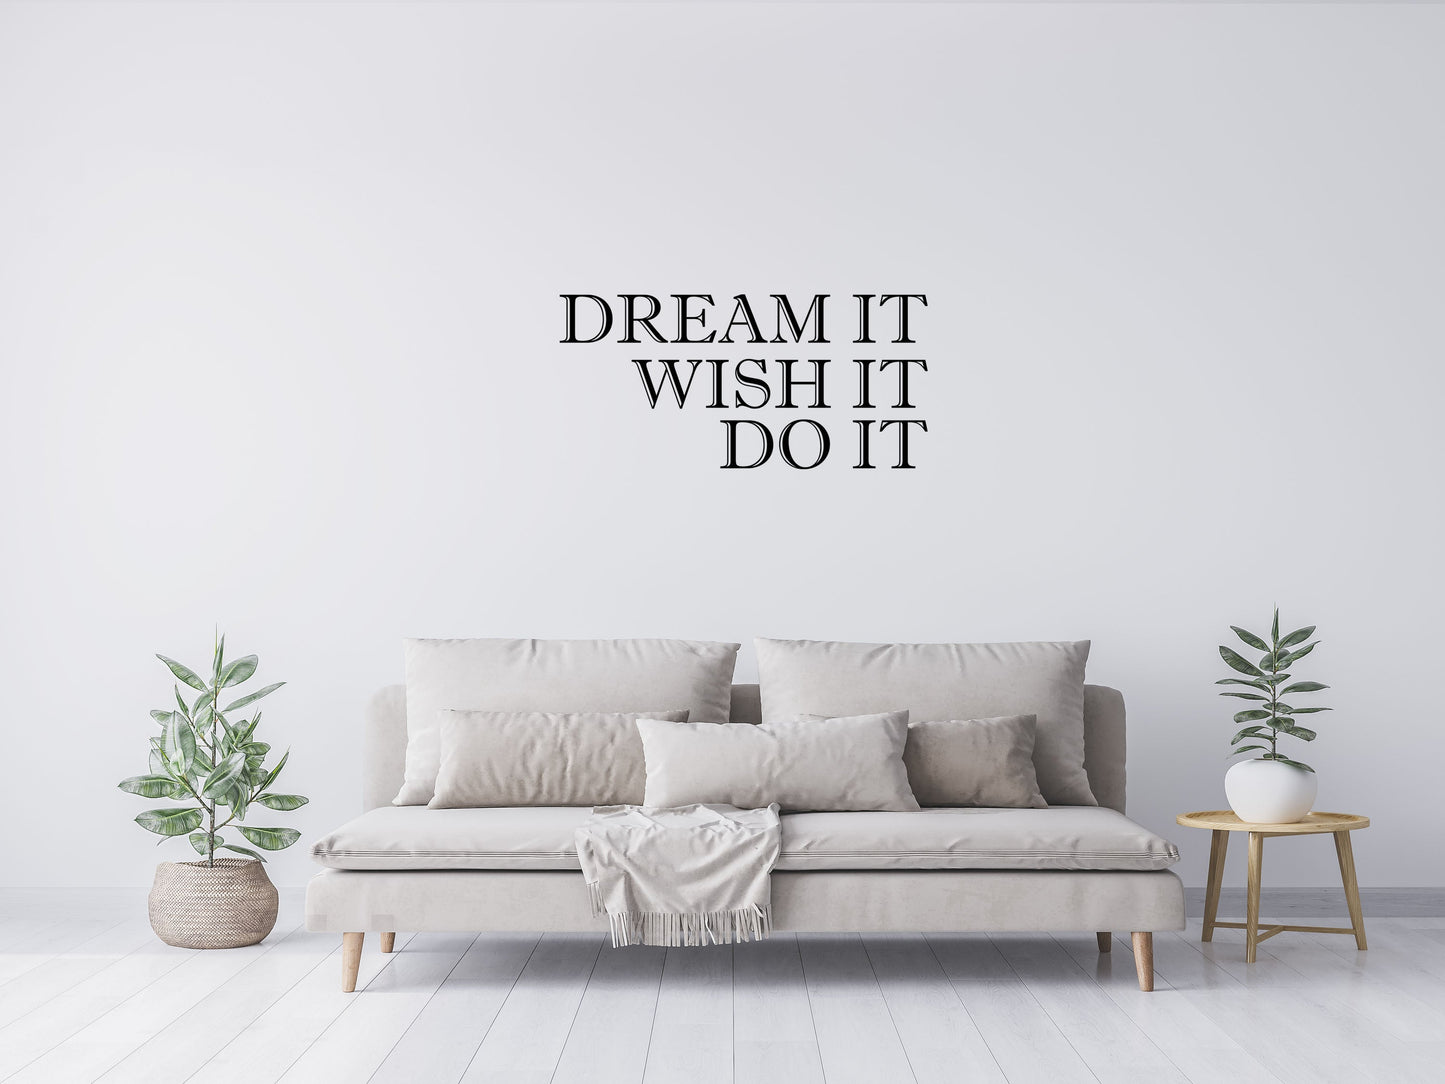 Dream It Wish It Do It Motivational Quote Decal Sticker Vinyl Wall Decal Inspirational Wall Signs 